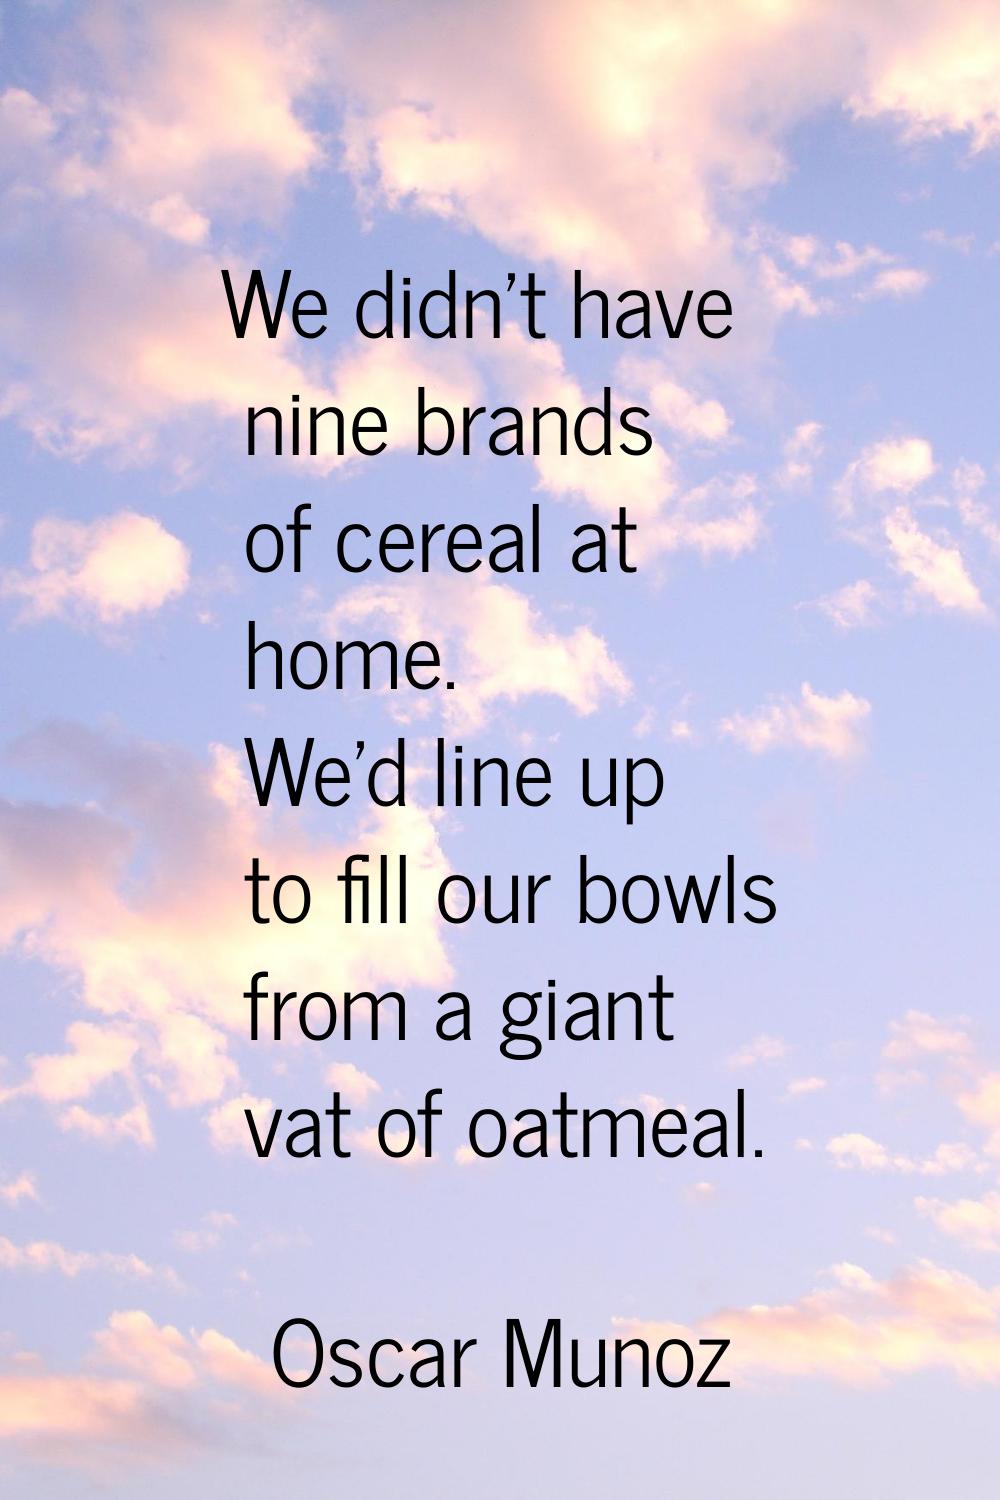 We didn't have nine brands of cereal at home. We'd line up to fill our bowls from a giant vat of oa